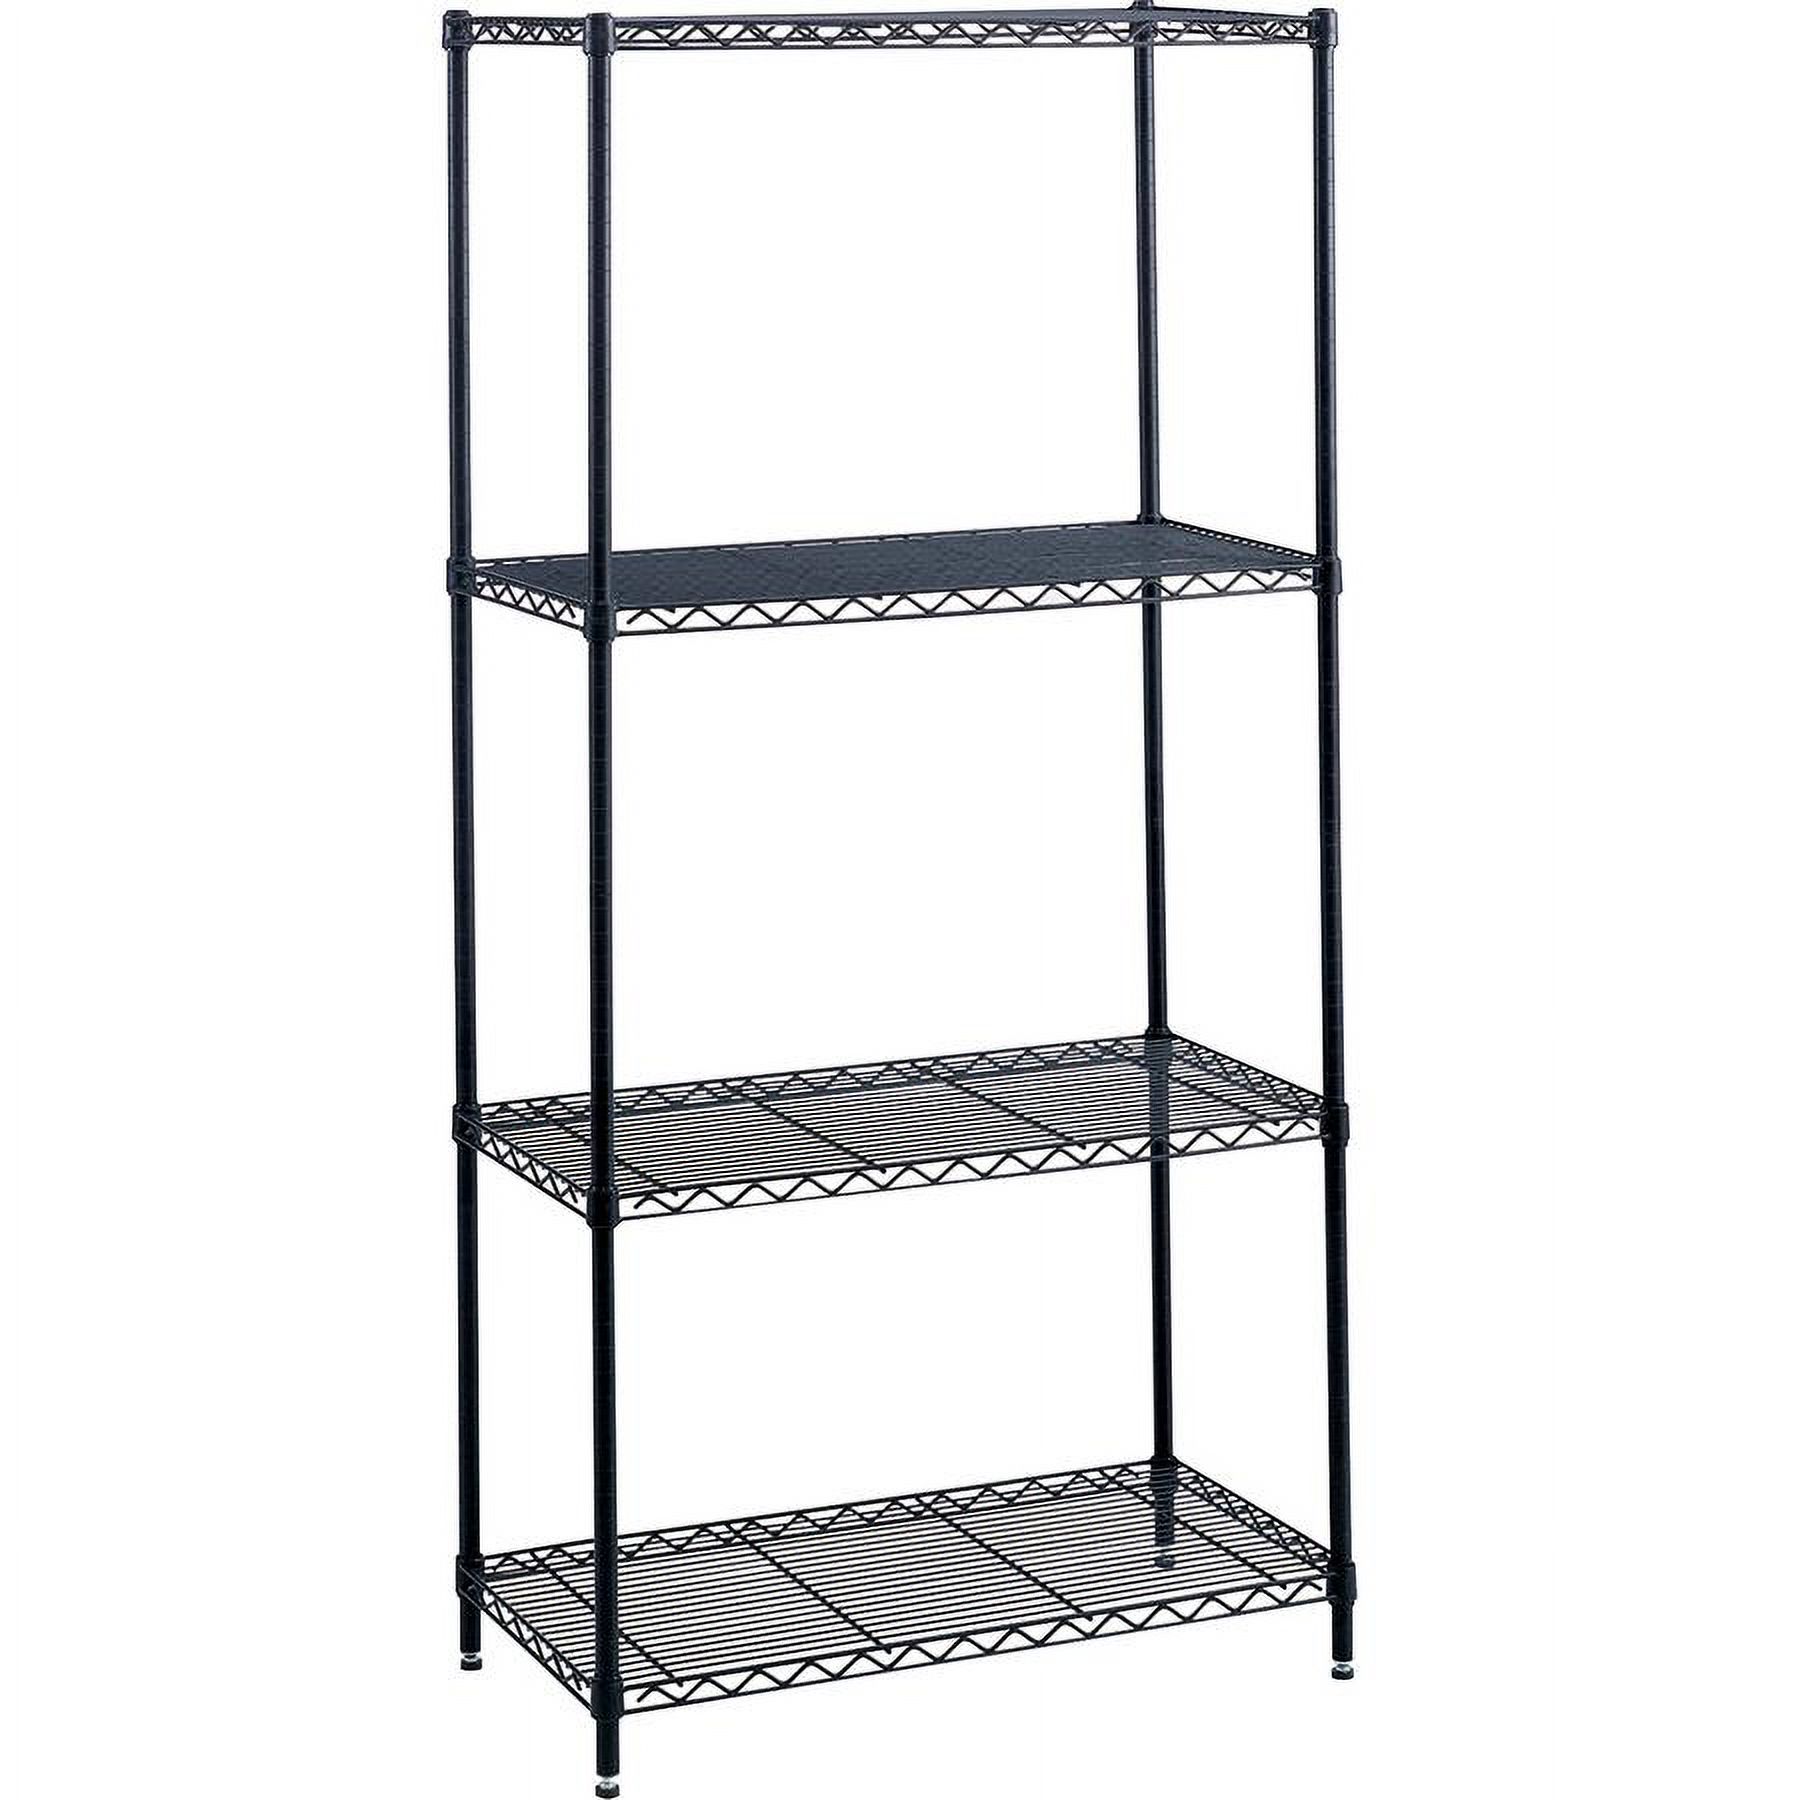 Safco Industrial Wire Shelving Starter Kit, Four-Shelf, 48w x 18d x 72h, Black - image 4 of 4